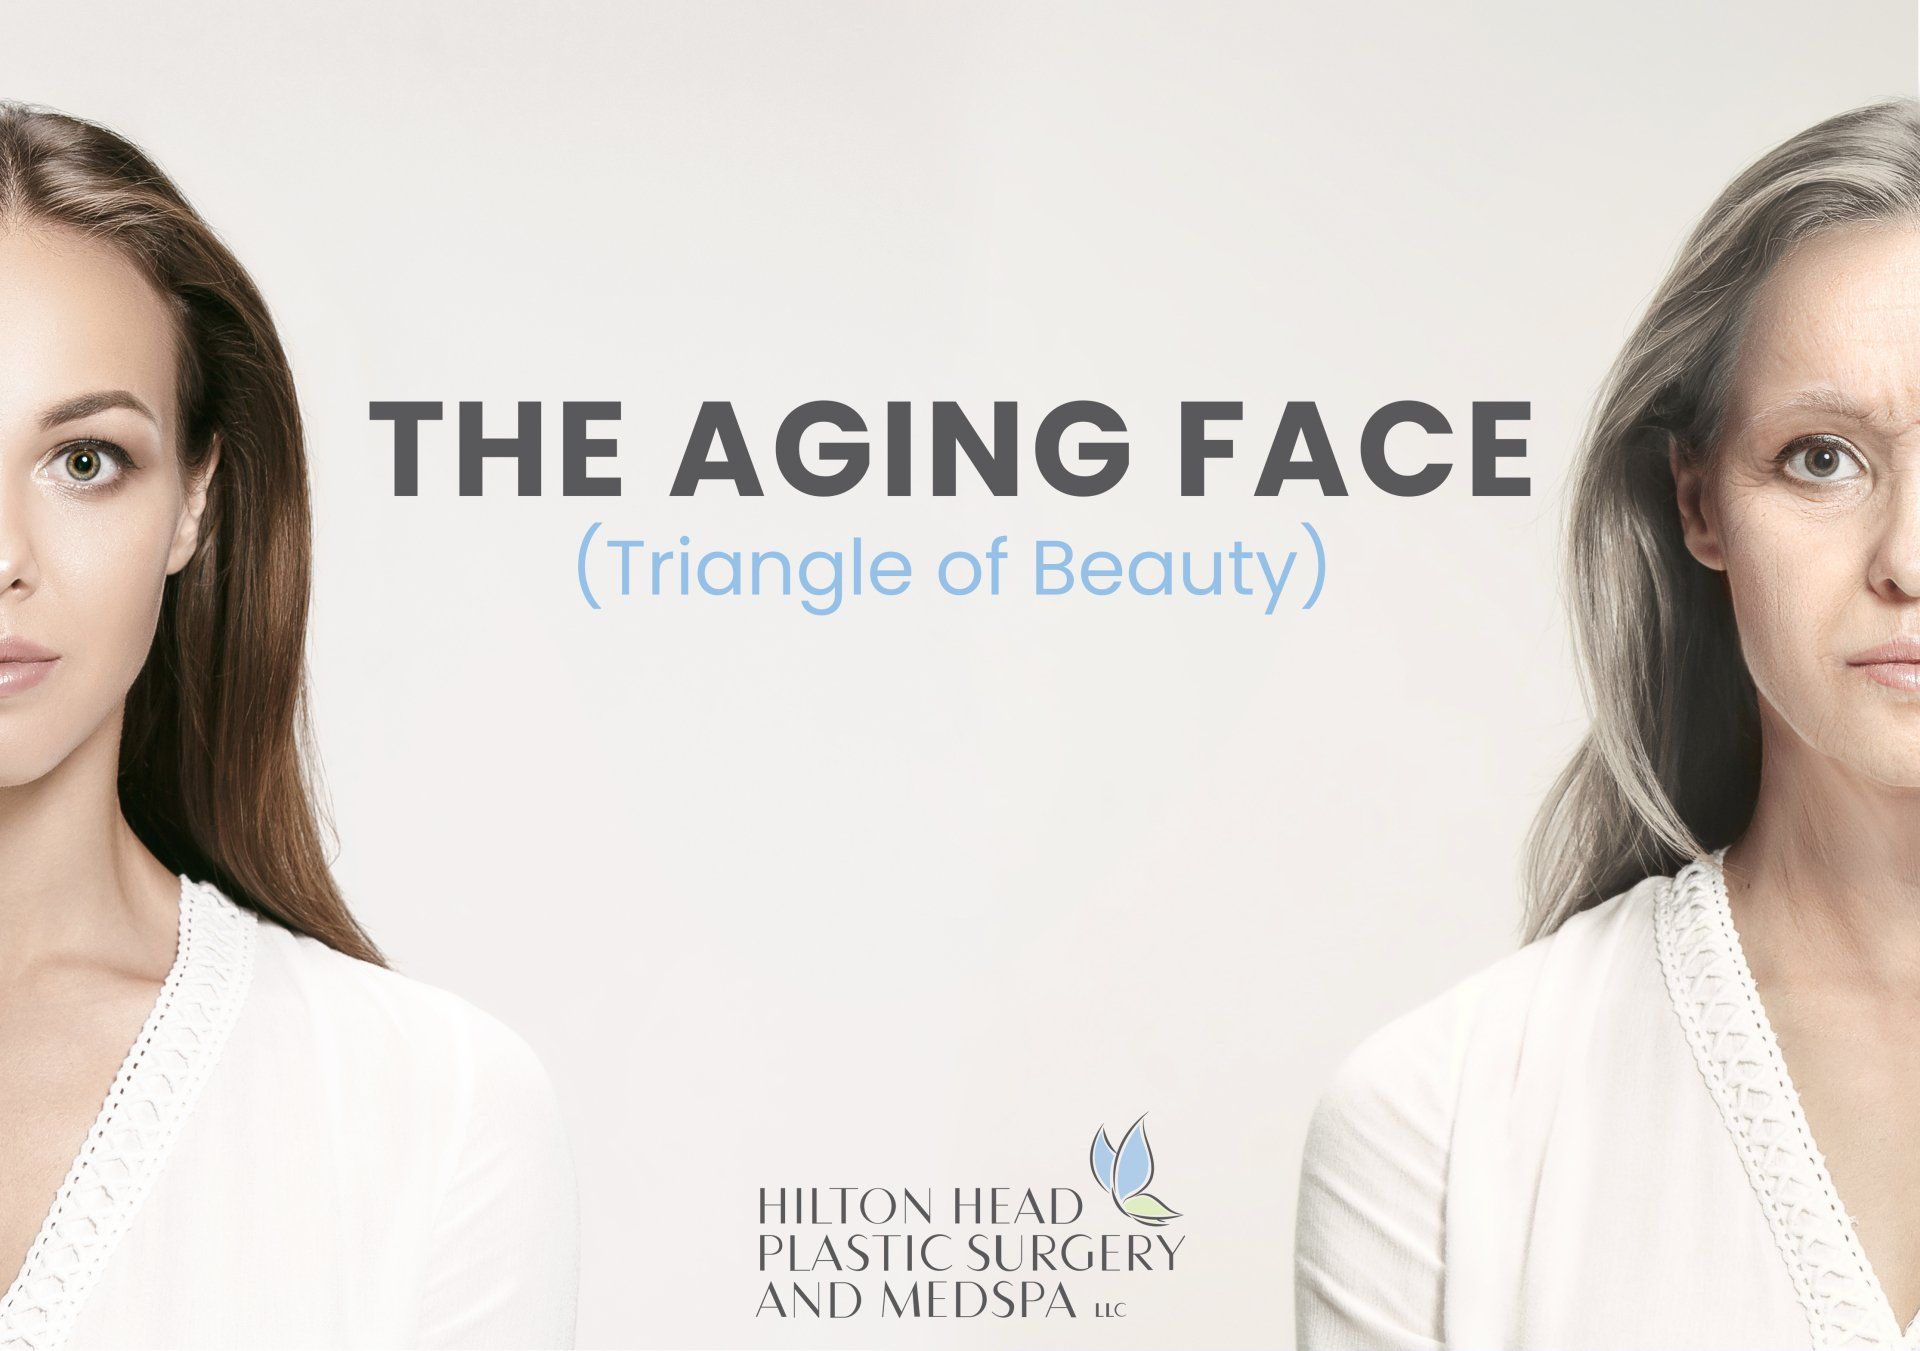 The Aging Face (Triangle of Beauty)